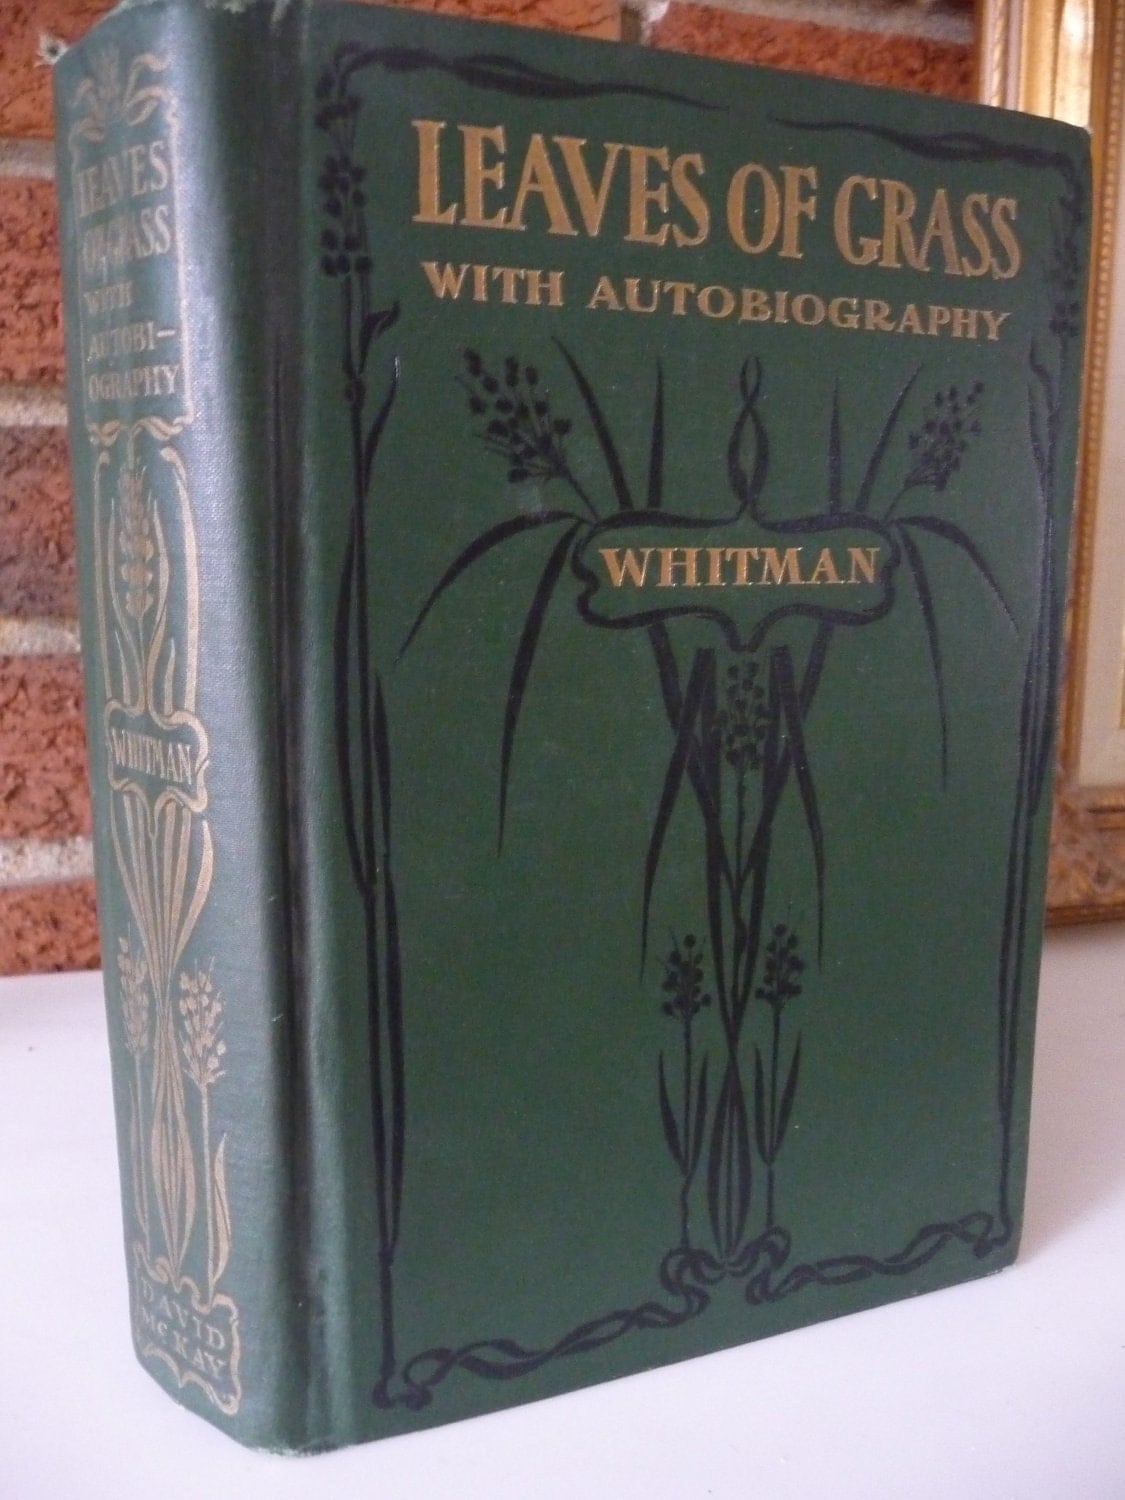 leaves of grass by walt whitman